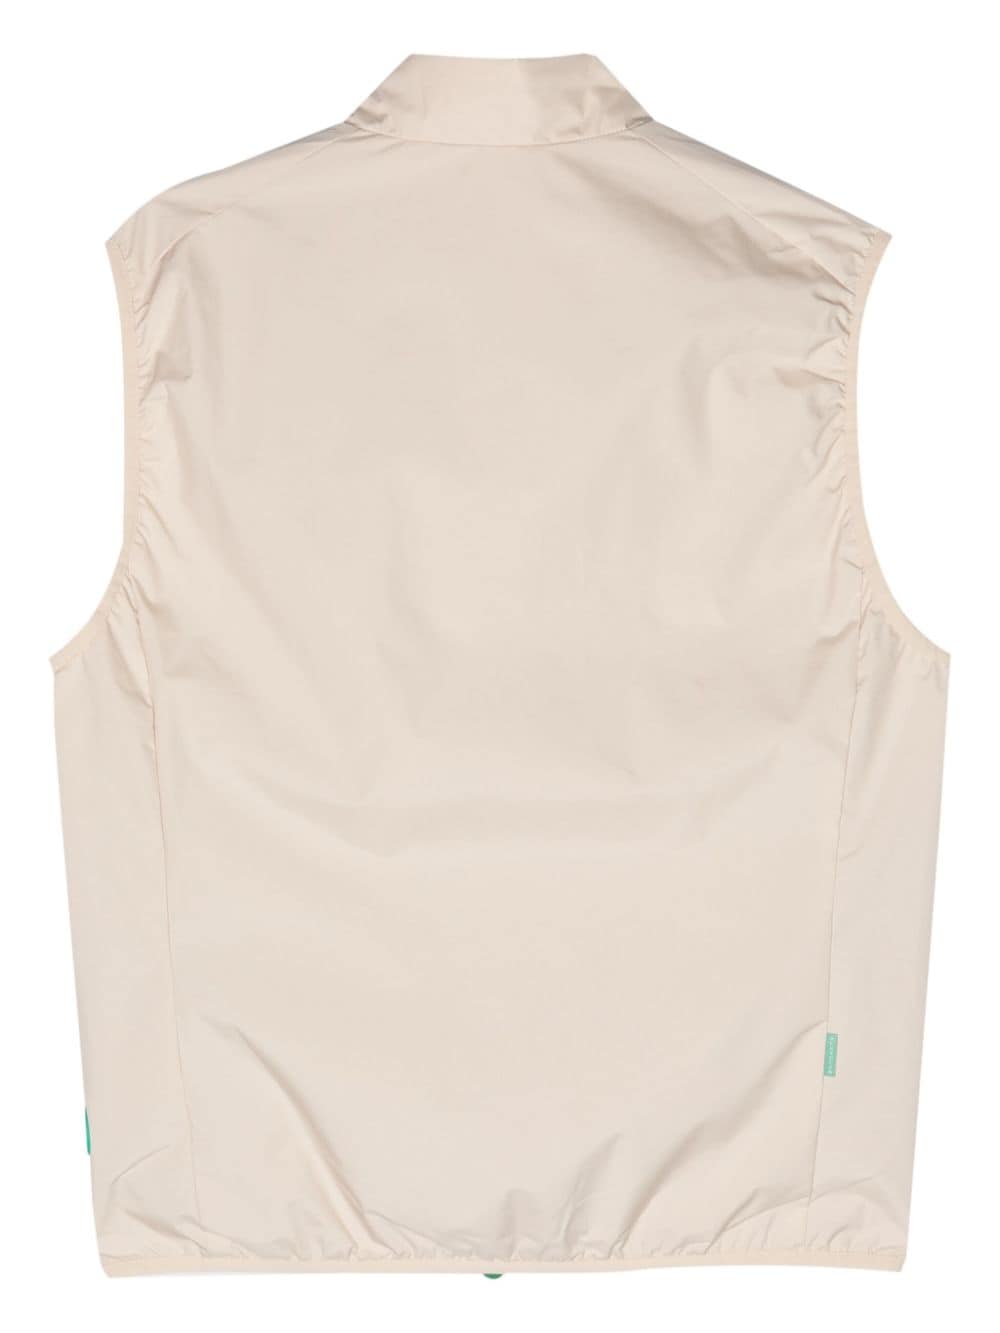 Image 2 of Save The Duck Mars shell gilet